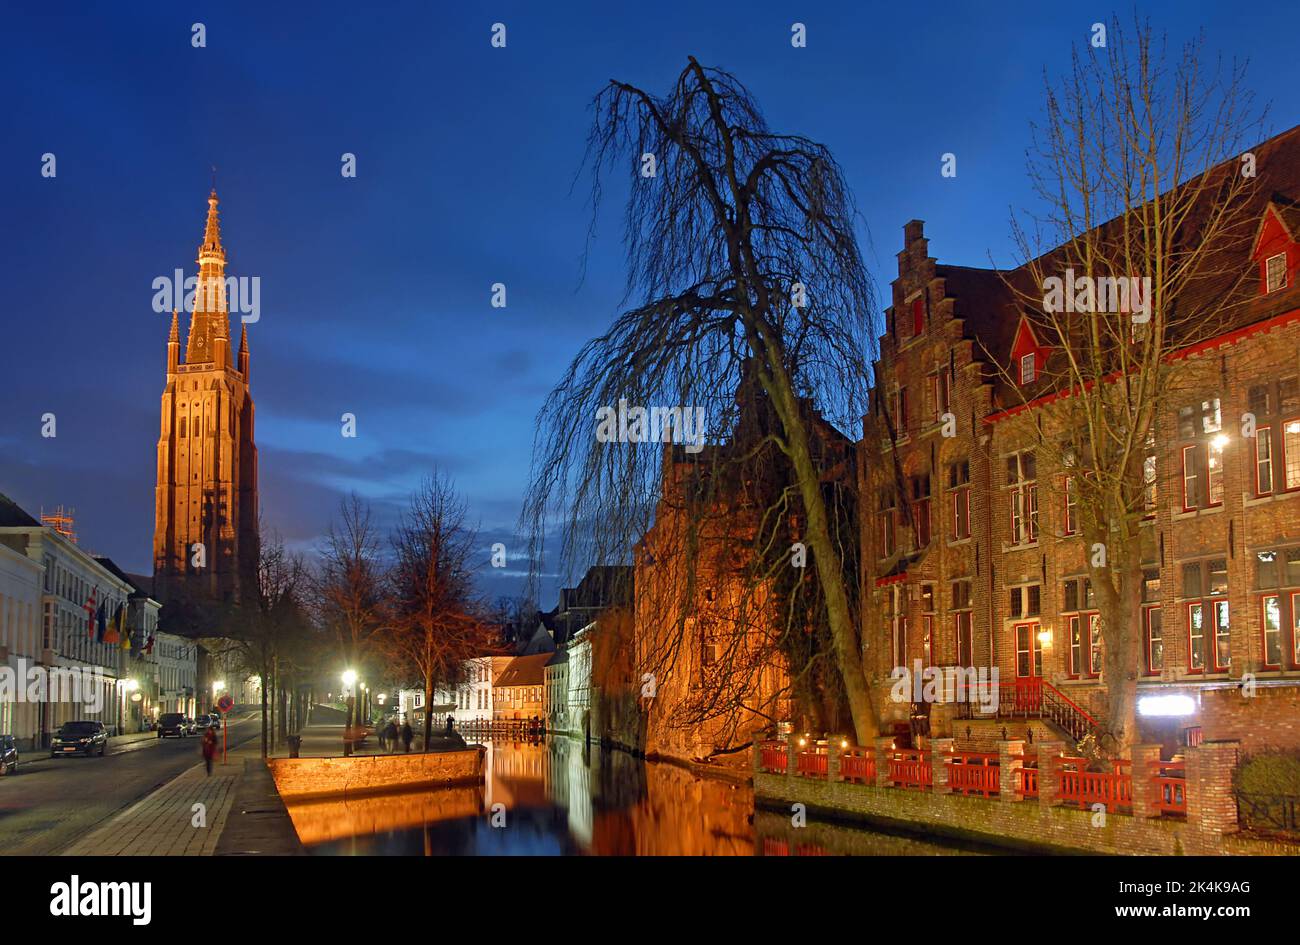 Brugge or Bruges, West Flanders, Belgium : The Dijver Canal in Brugge at night with the Onze Lieve Vrouwekerk or Church of Our Lady. Stock Photo